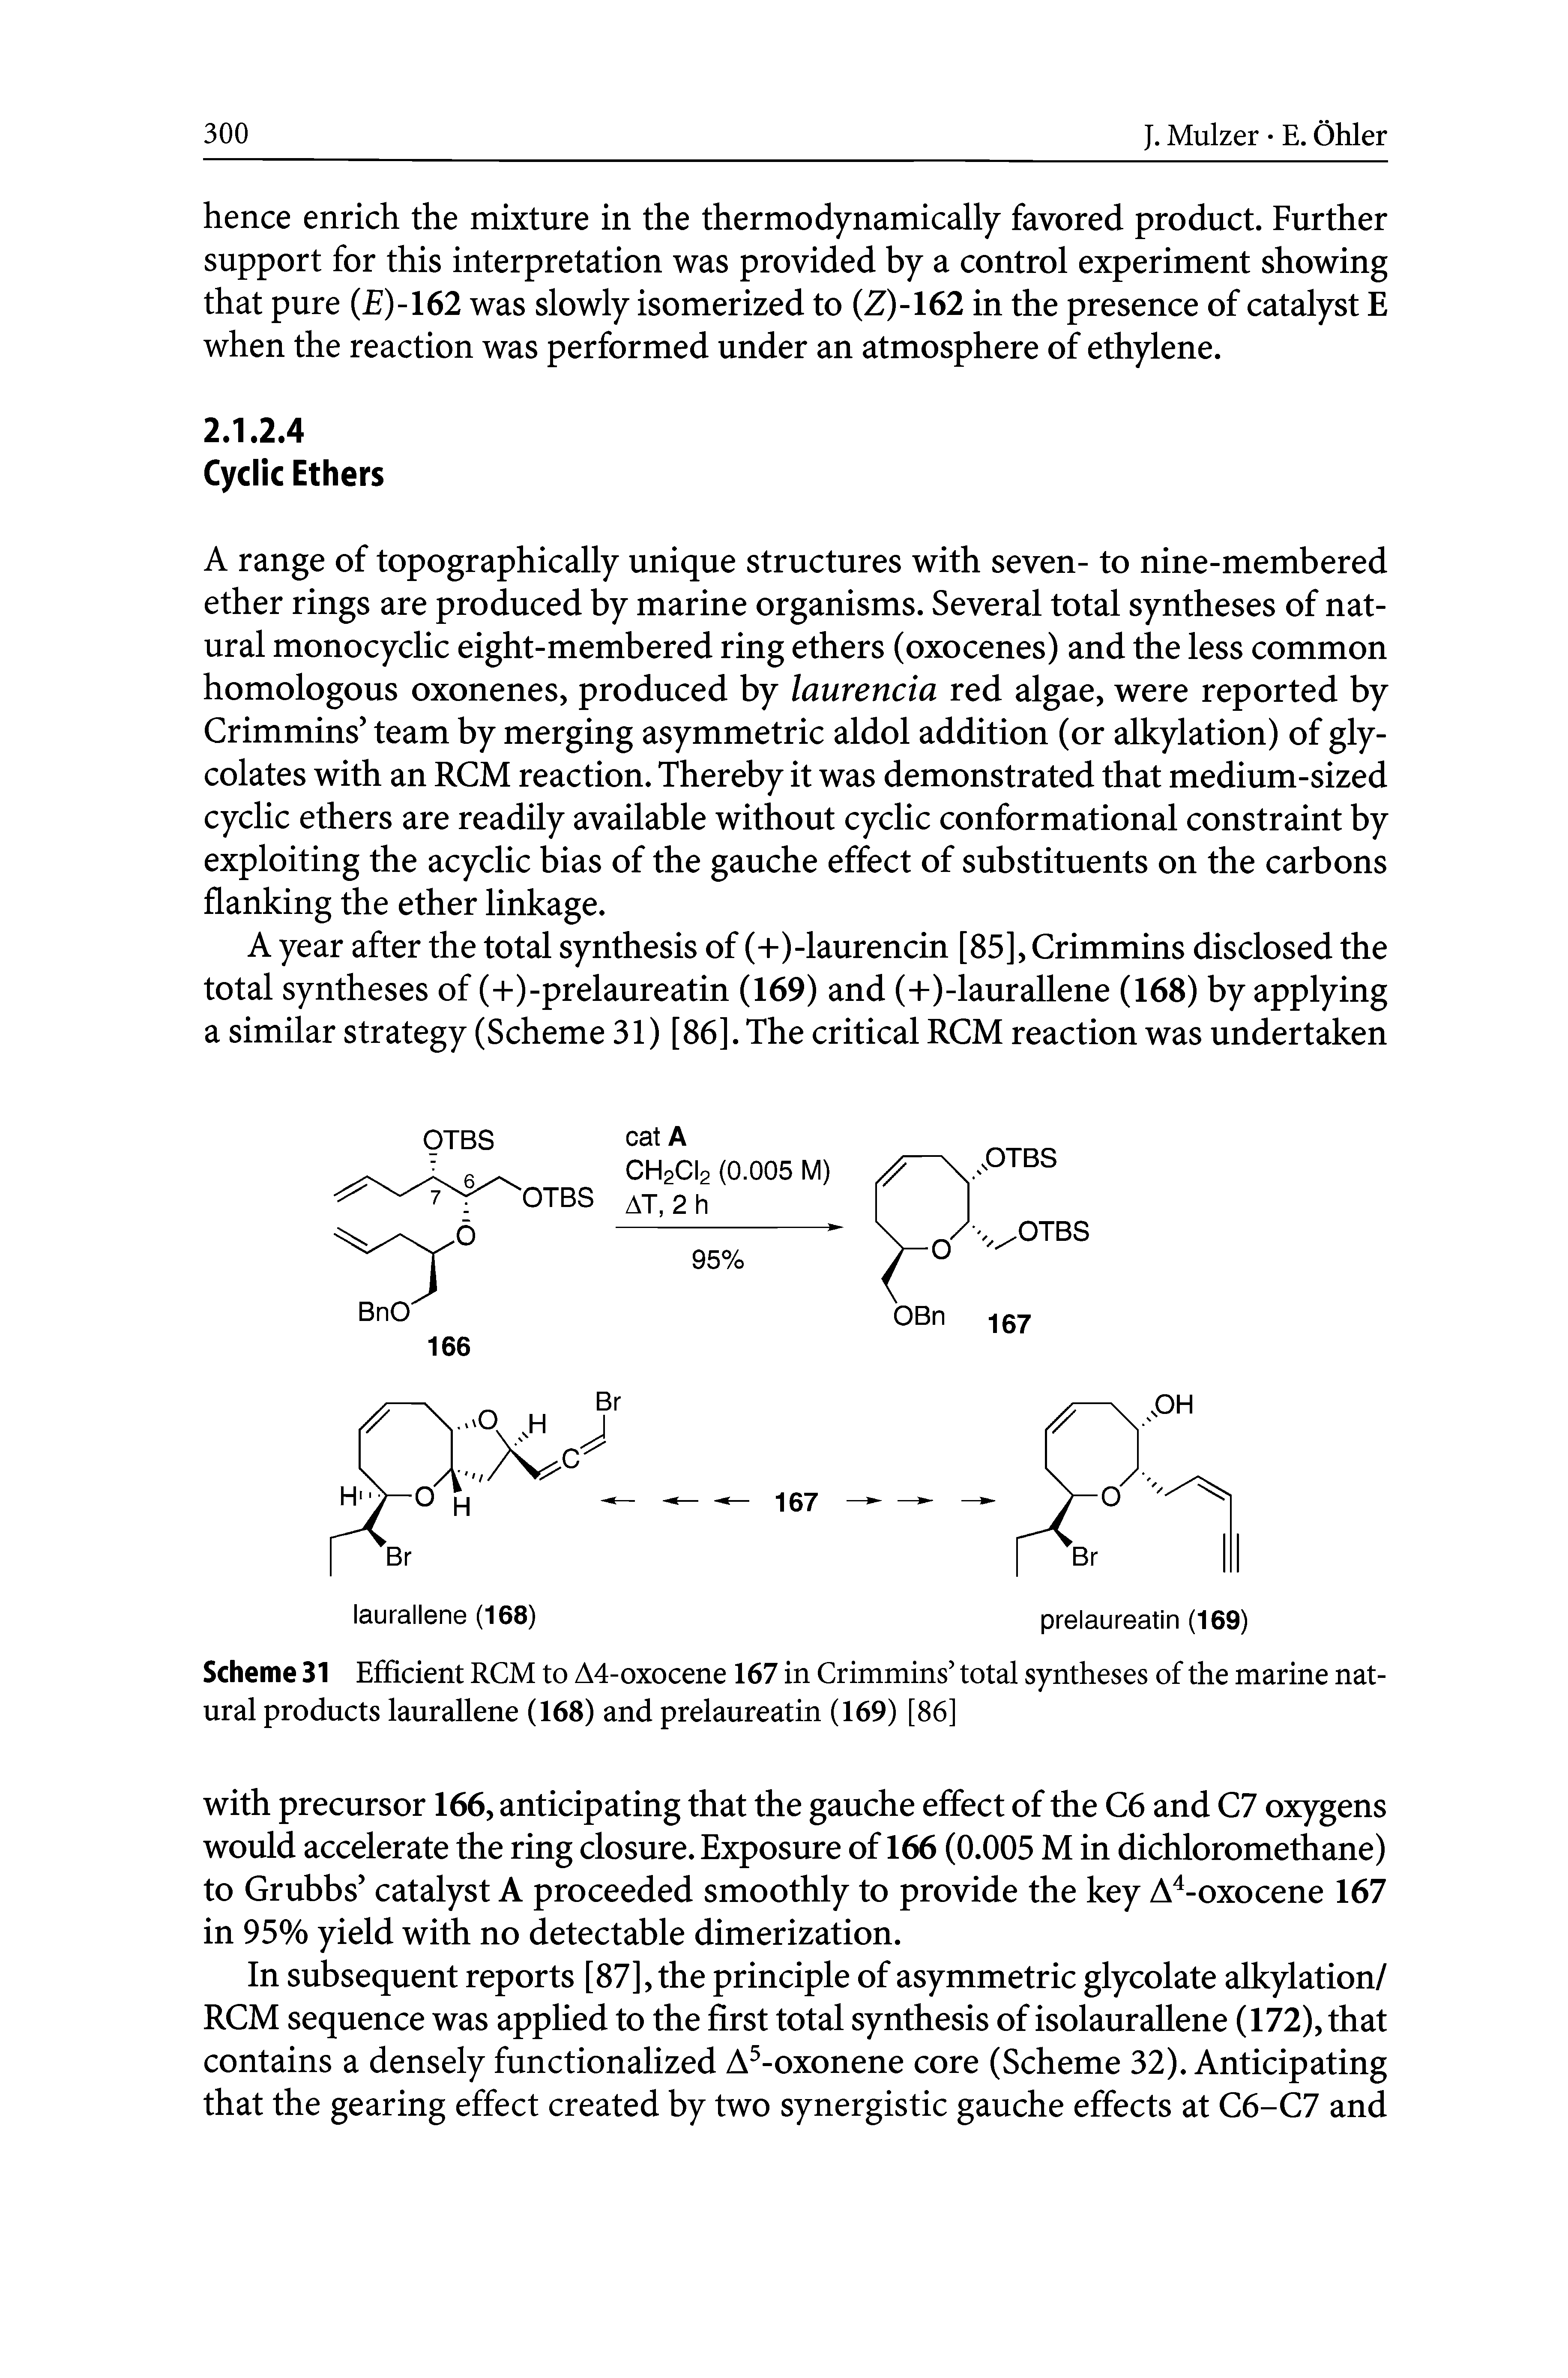 Scheme 31 Efficient RCM to A4-oxocene 167 in Crimmins total syntheses of the marine natural products laurallene (168) and prelaureatin (169) [86]...